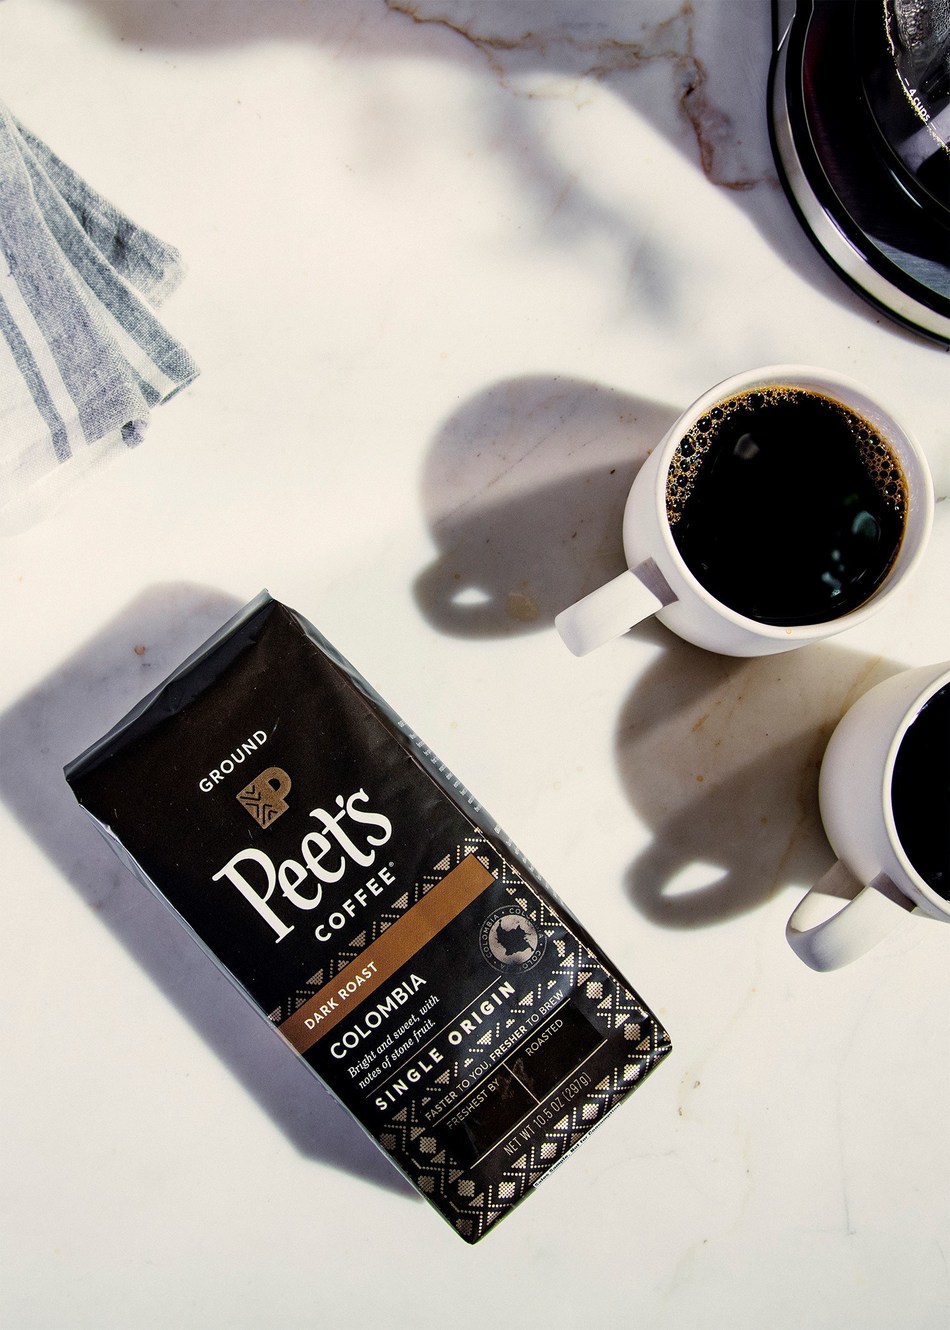 Peet's Coffee Celebrates 2019 National Coffee Day with OnePoll Survey